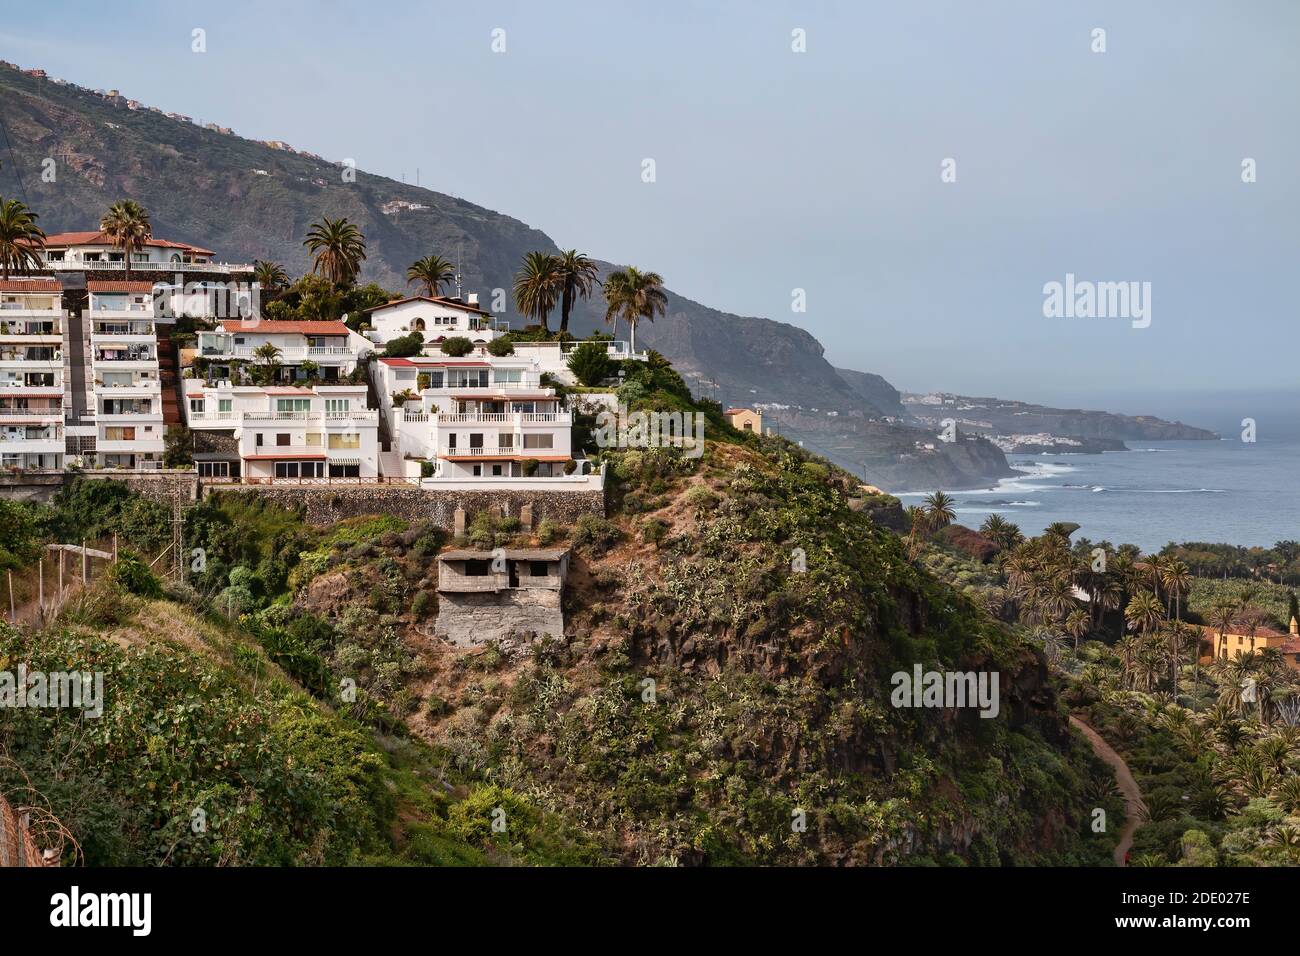 Holiday homes on Tenerife, Spain. Can be used as background Stock Photo